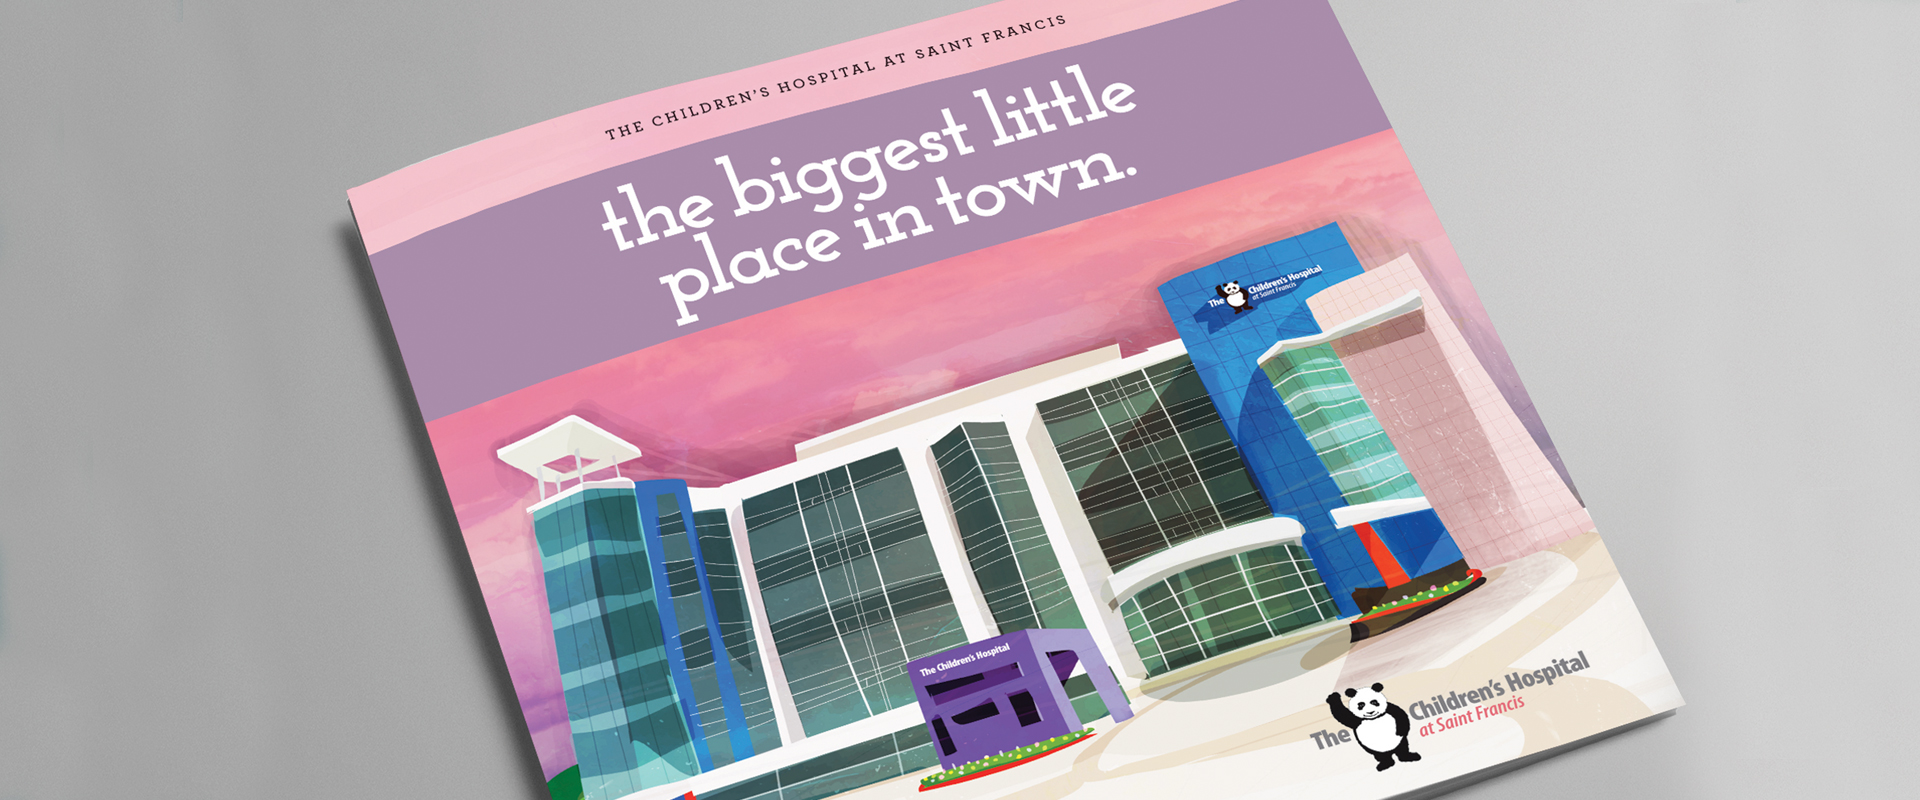 A children's book for Saint Francis Health System designed by AcrobatAnt.